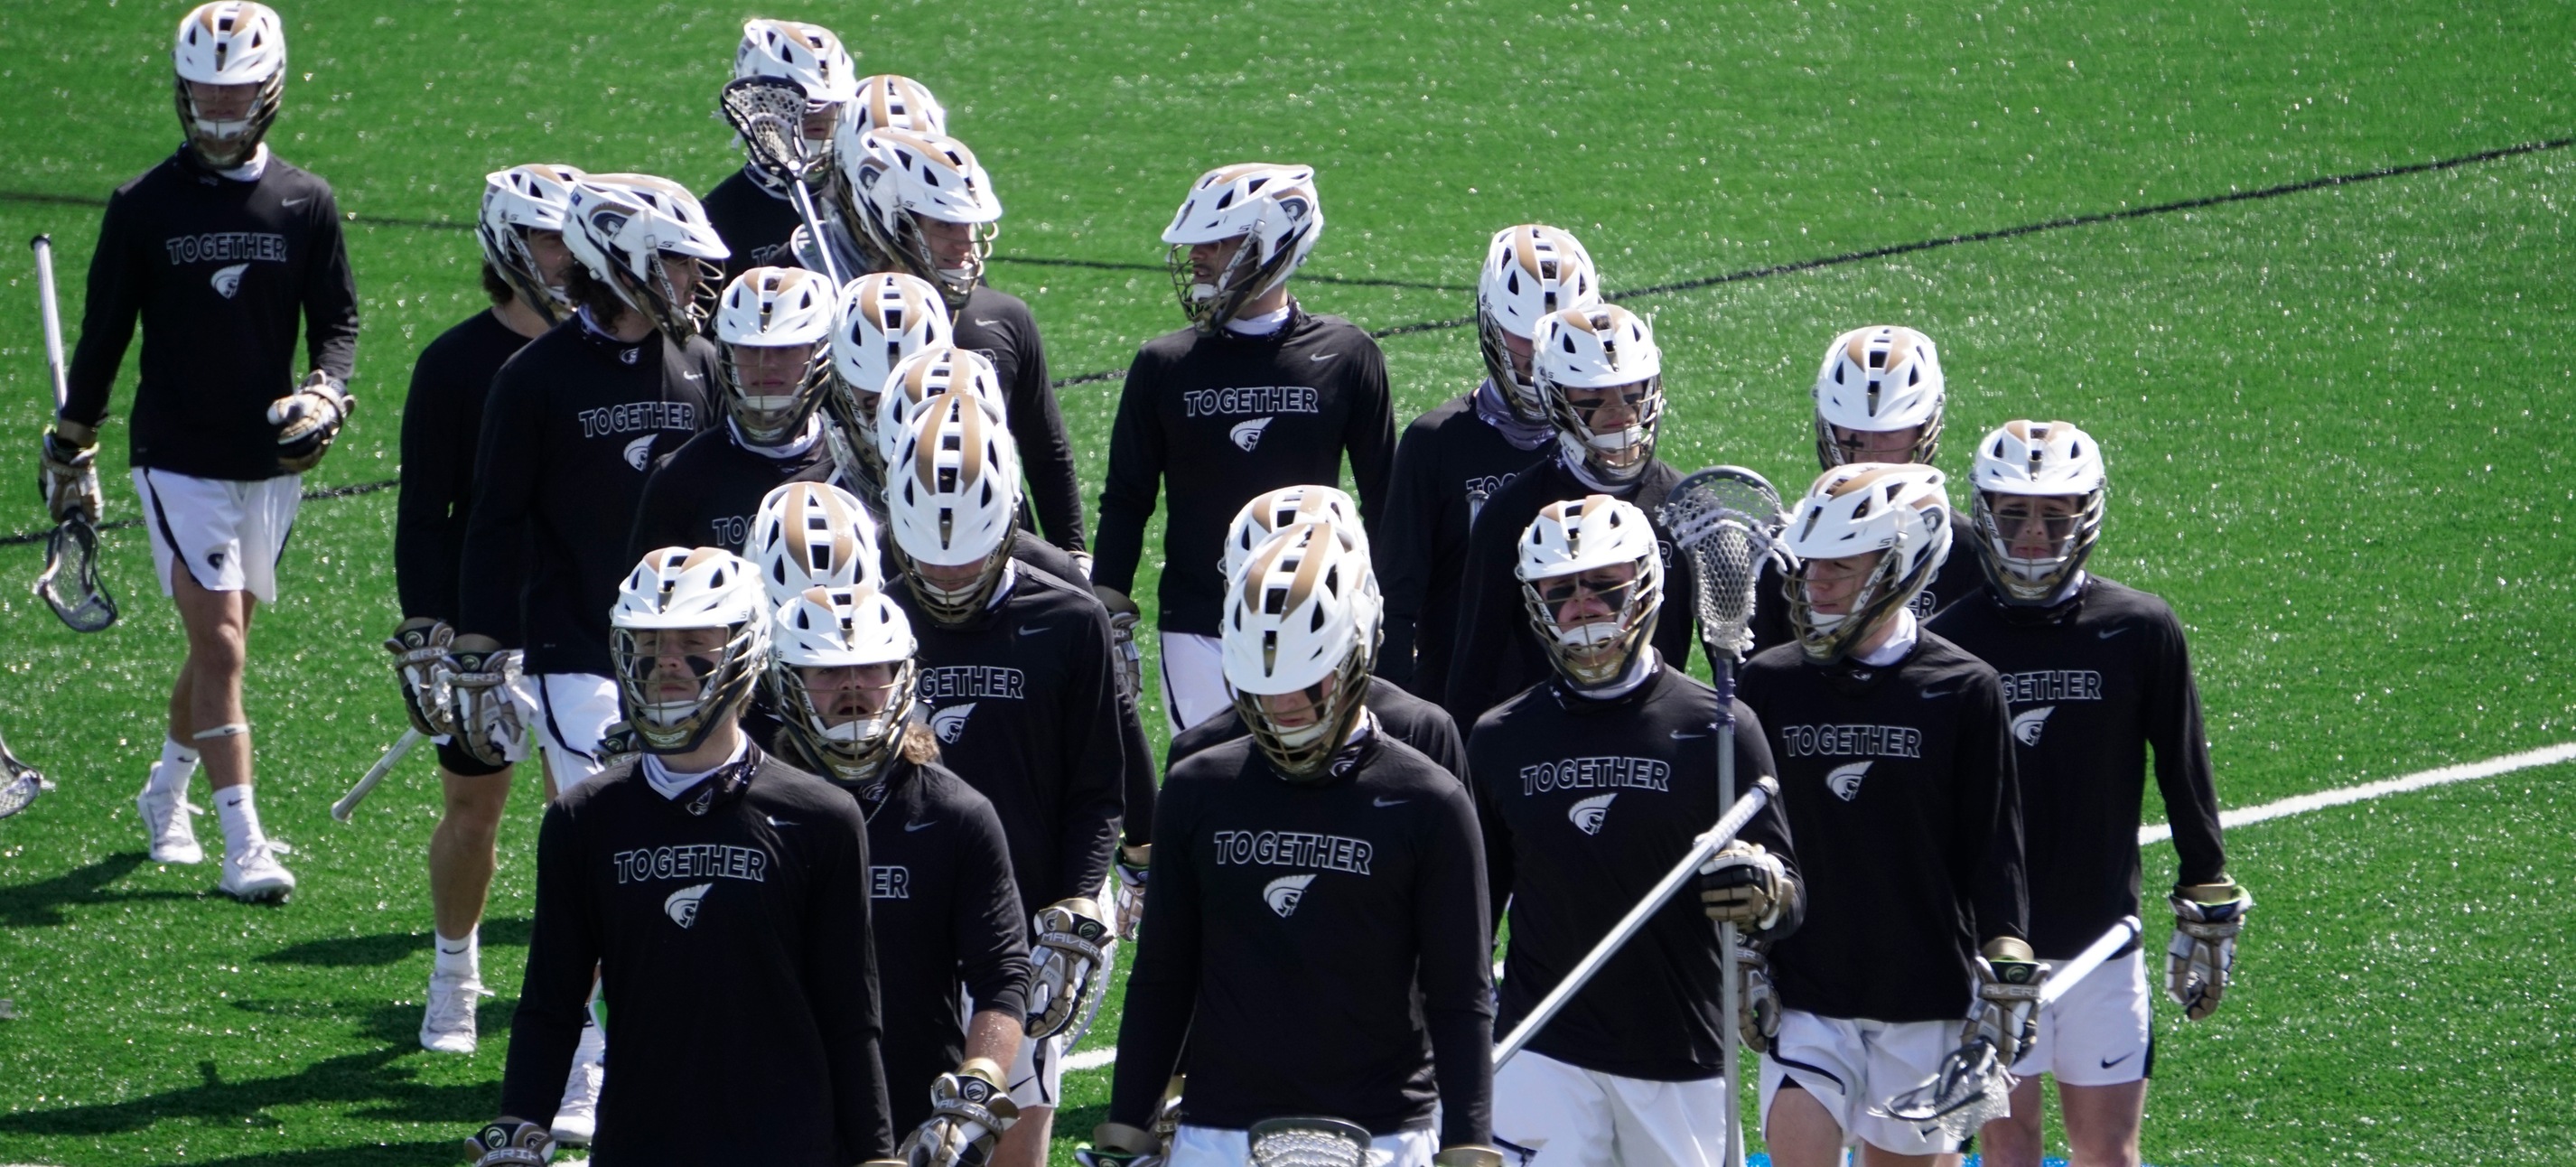 Men's Lacrosse's Rally Comes Up Short Against Tusculum 9-7